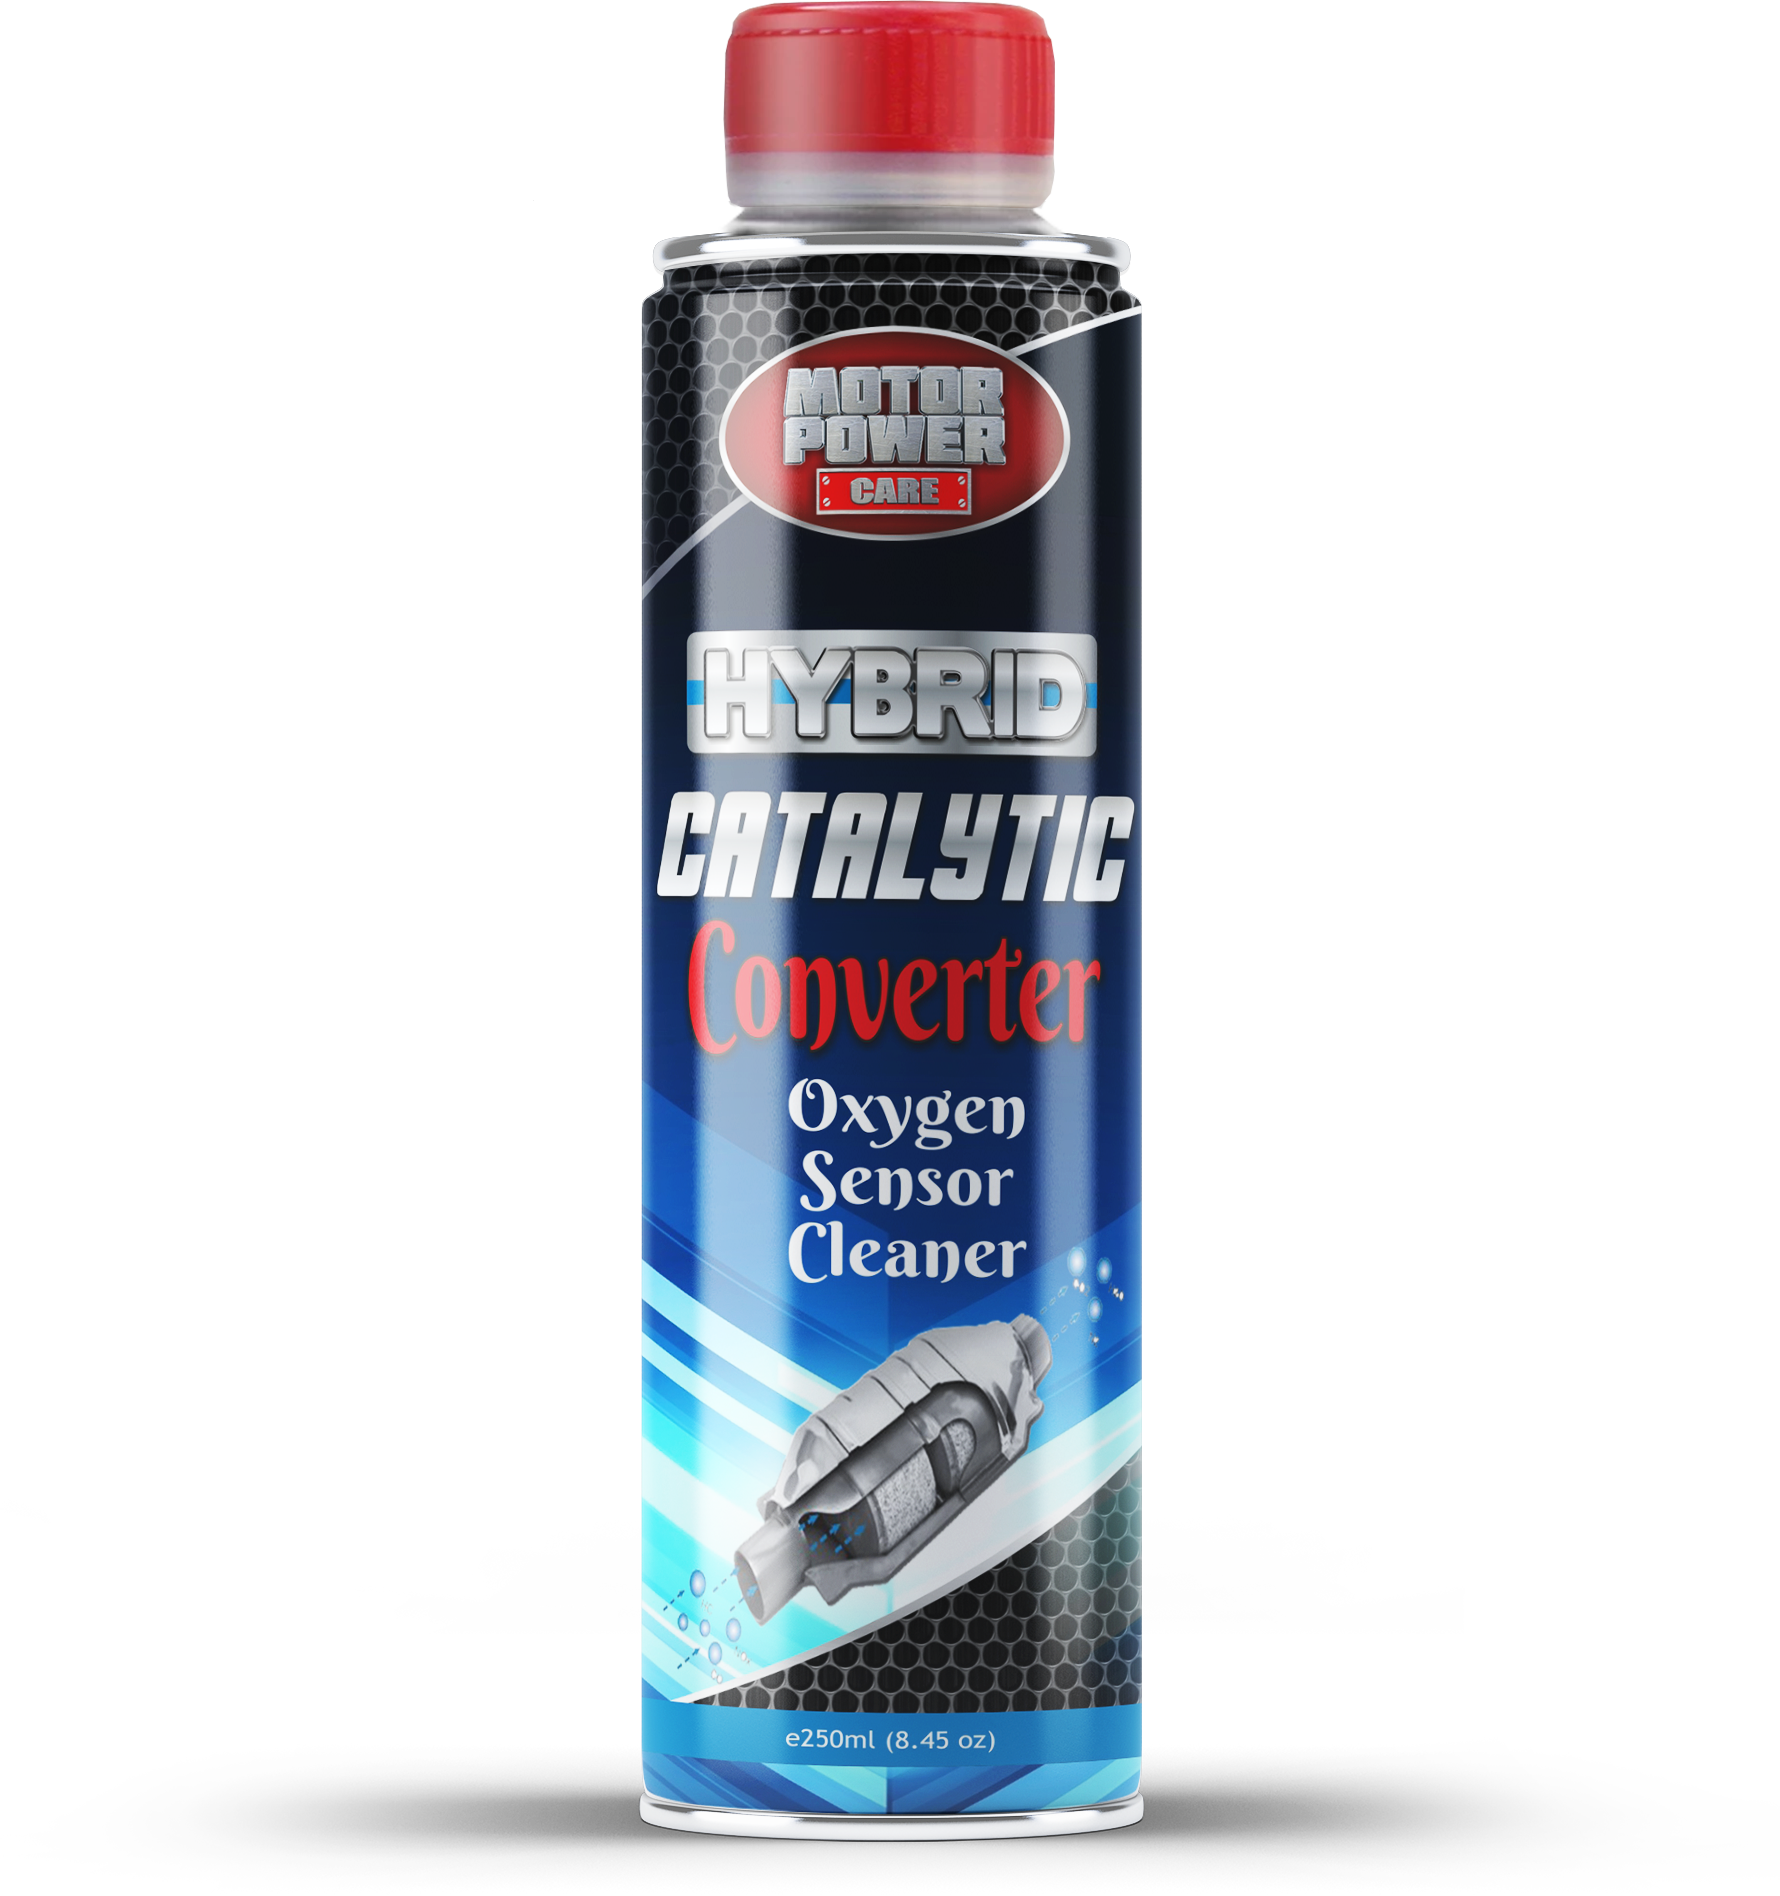 Hybrid Car Vehicle Catalytic Converter Cleaner A Special Formula for Hybrid Engines by MotorPower Care